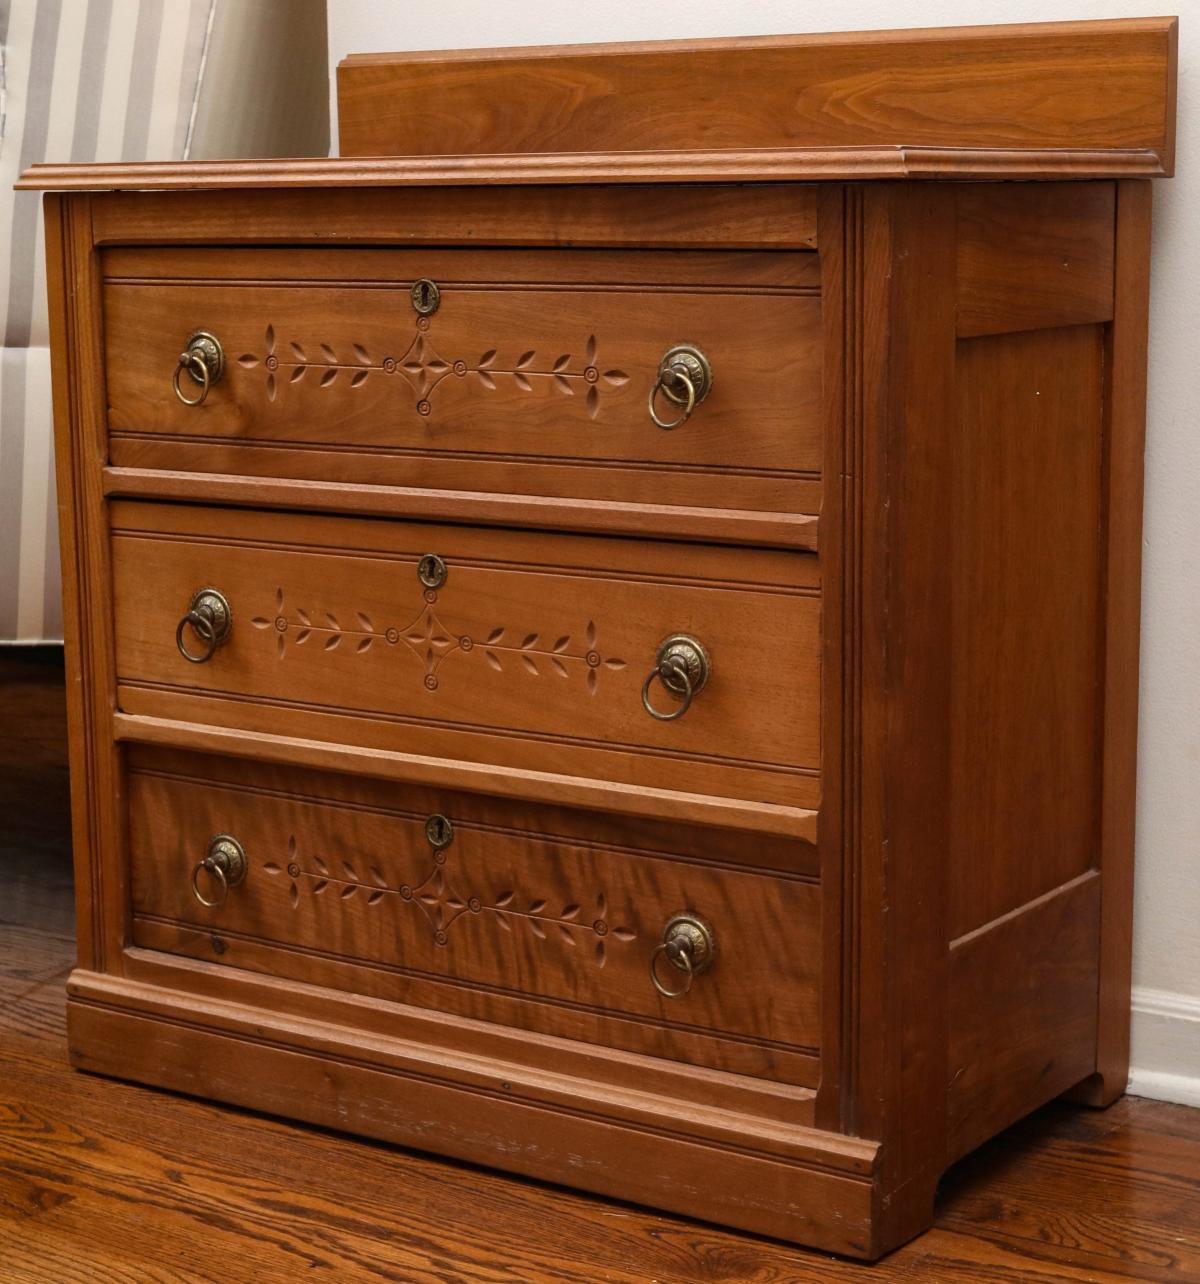 A 19TH C. AMERICAN EASTLAKE STYLE CHEST